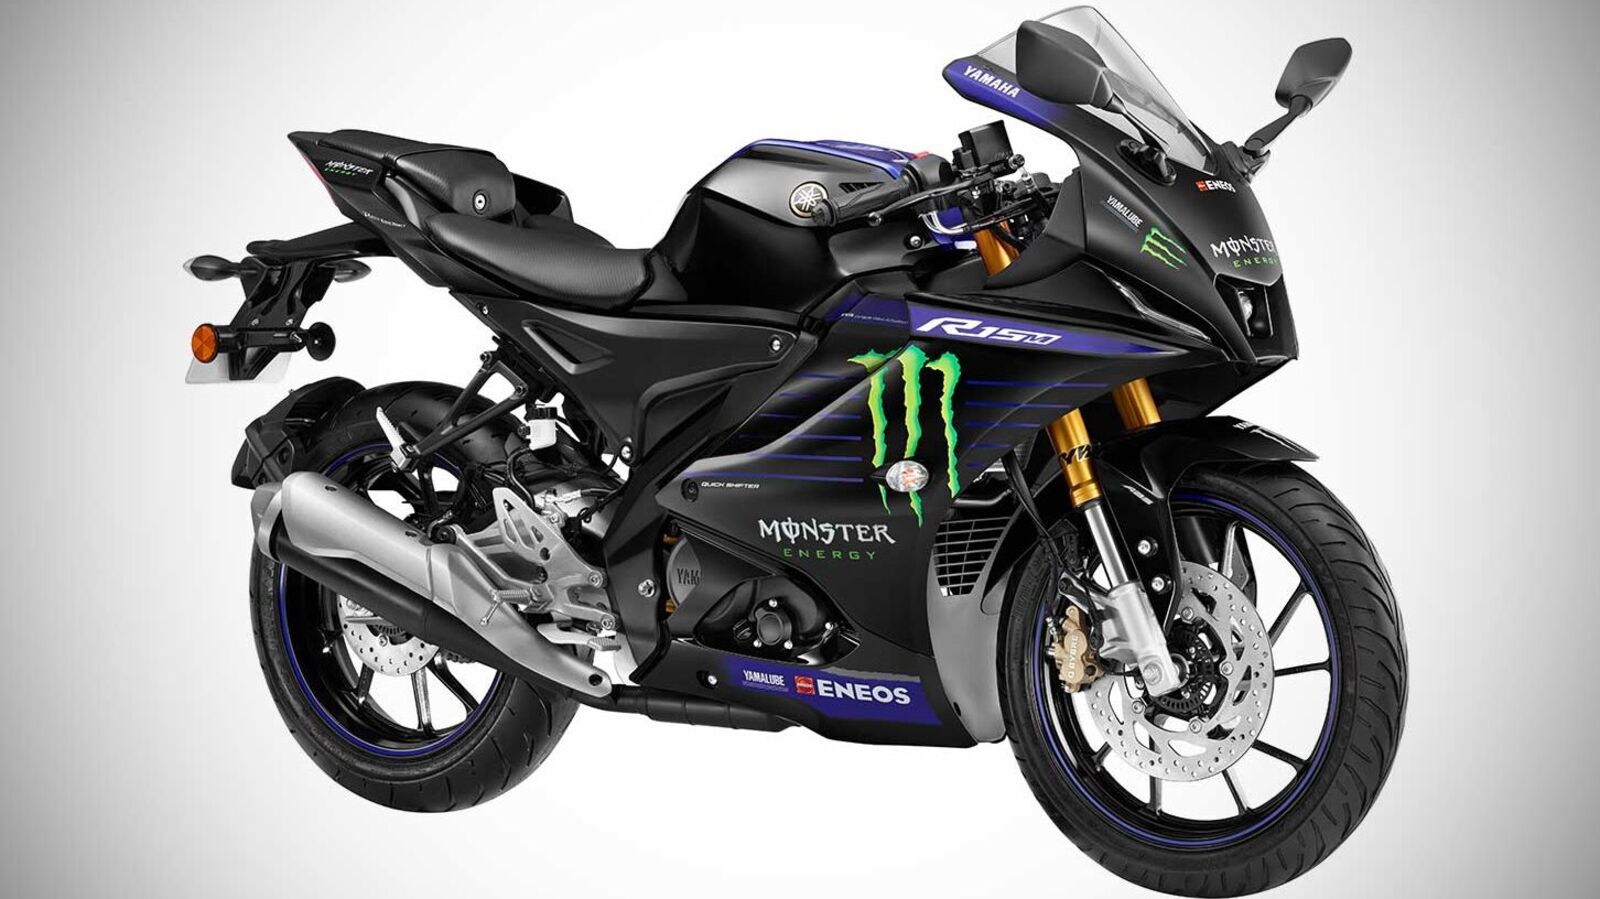 Yamaha YZFR15 V4 MotoGP edition gets sold out in India HT Auto